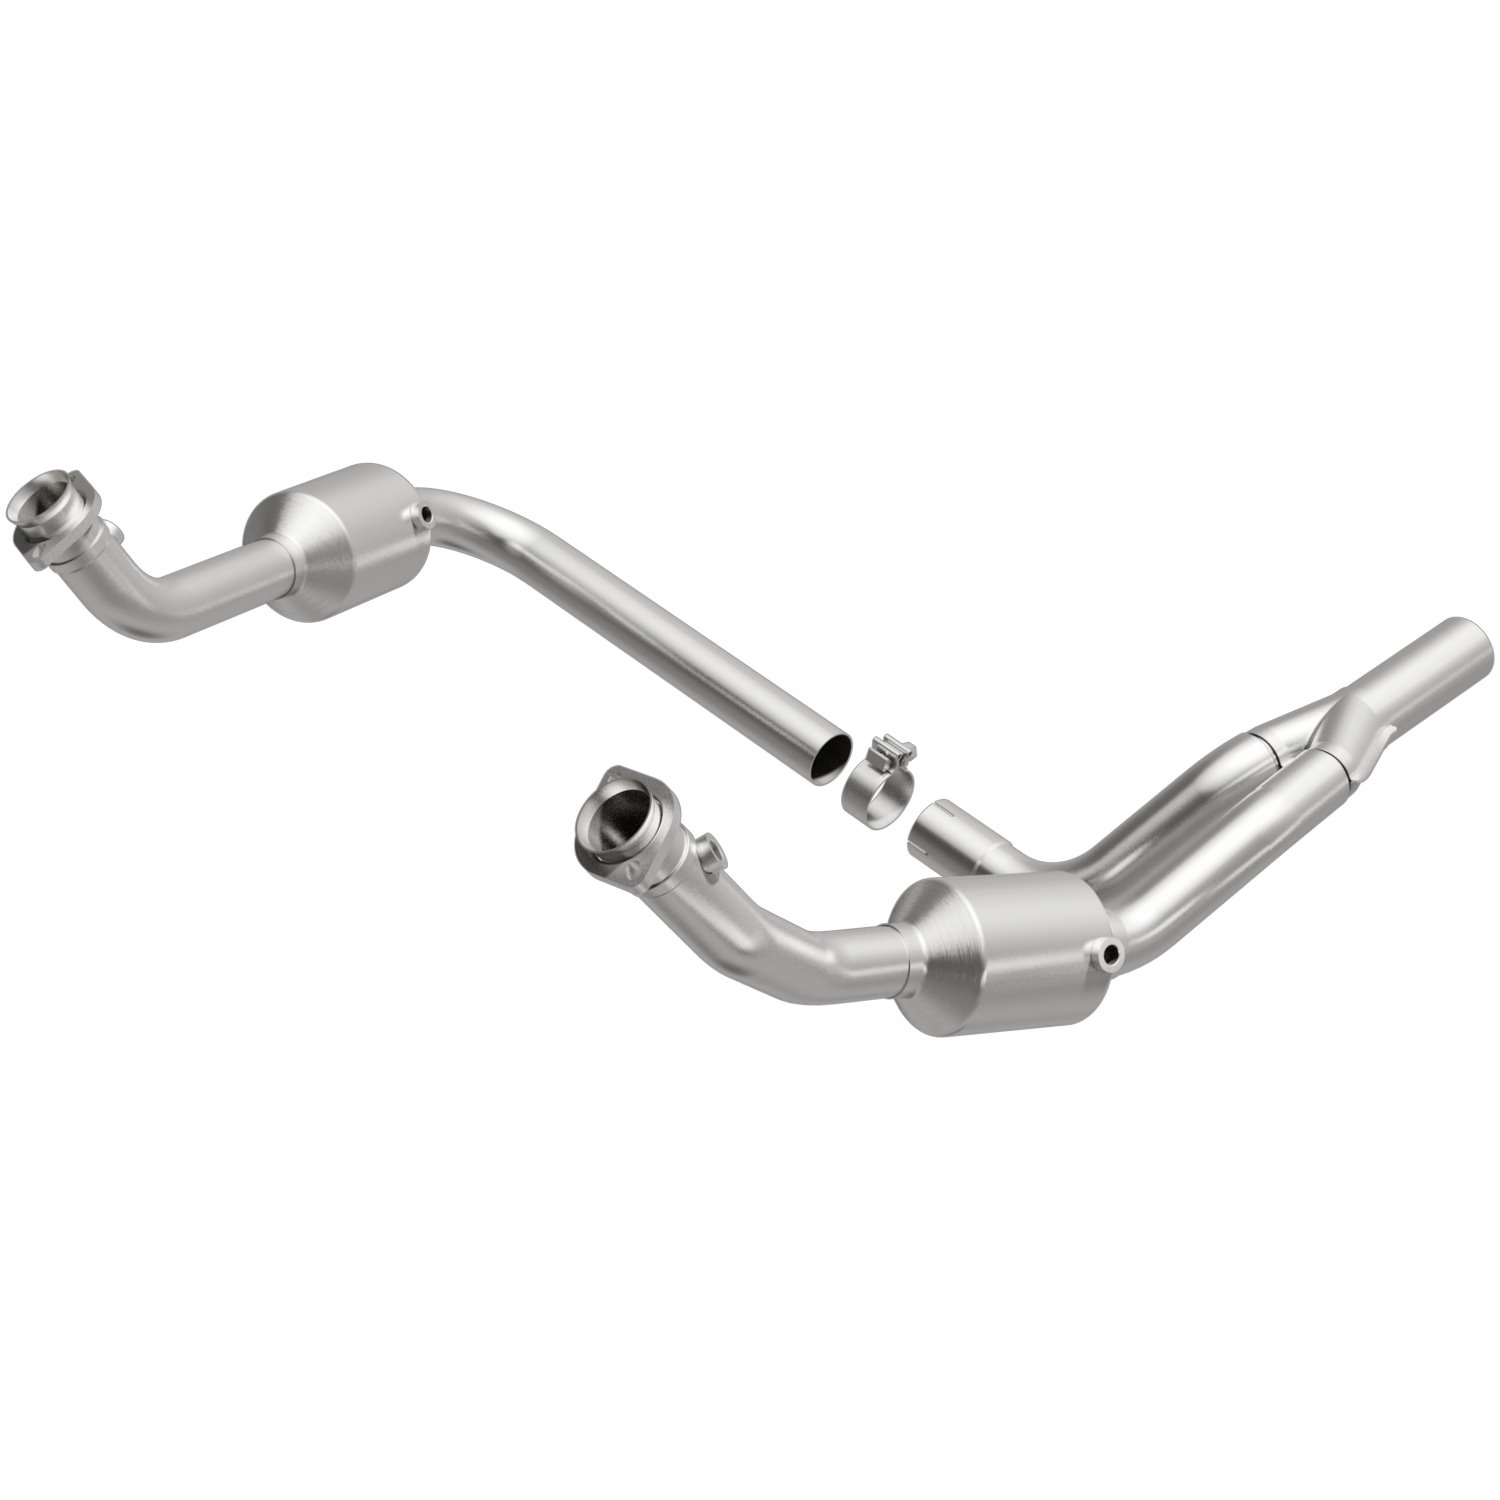 2010-2011 Jeep Wrangler OEM Grade Federal / EPA Compliant Direct-Fit Catalytic Converter 21-458